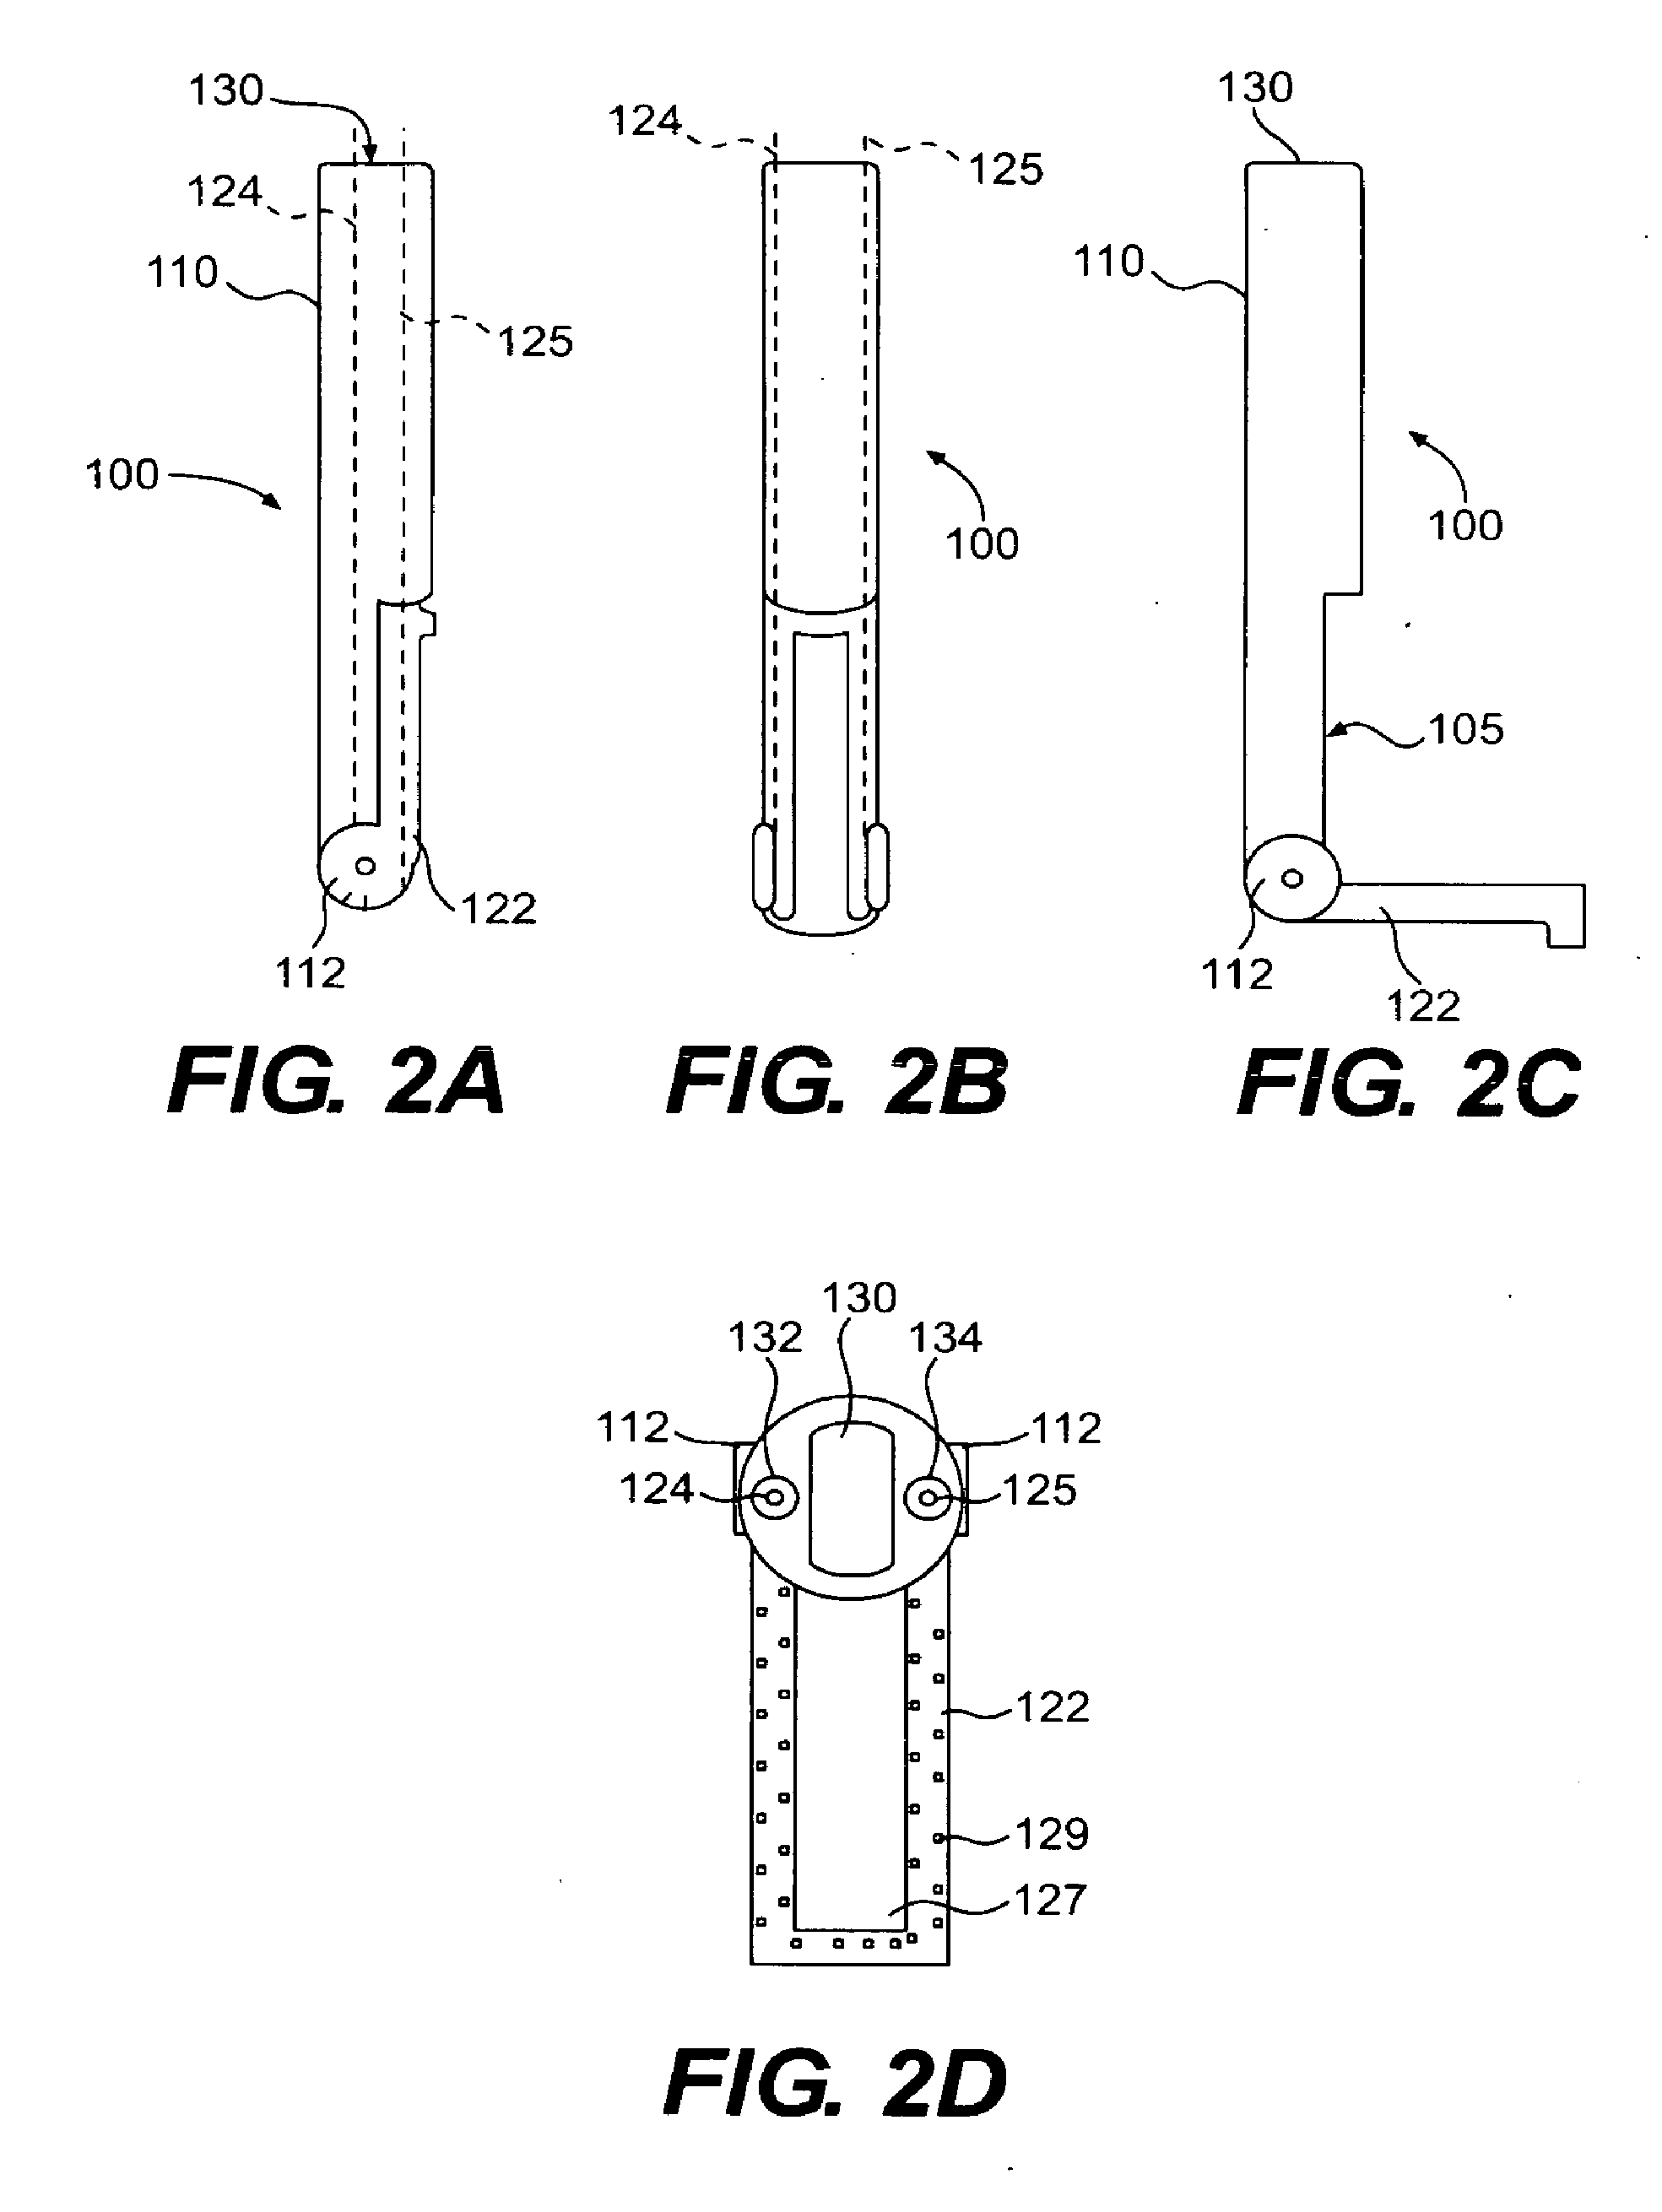 Methods and devices for folding and securing tissue